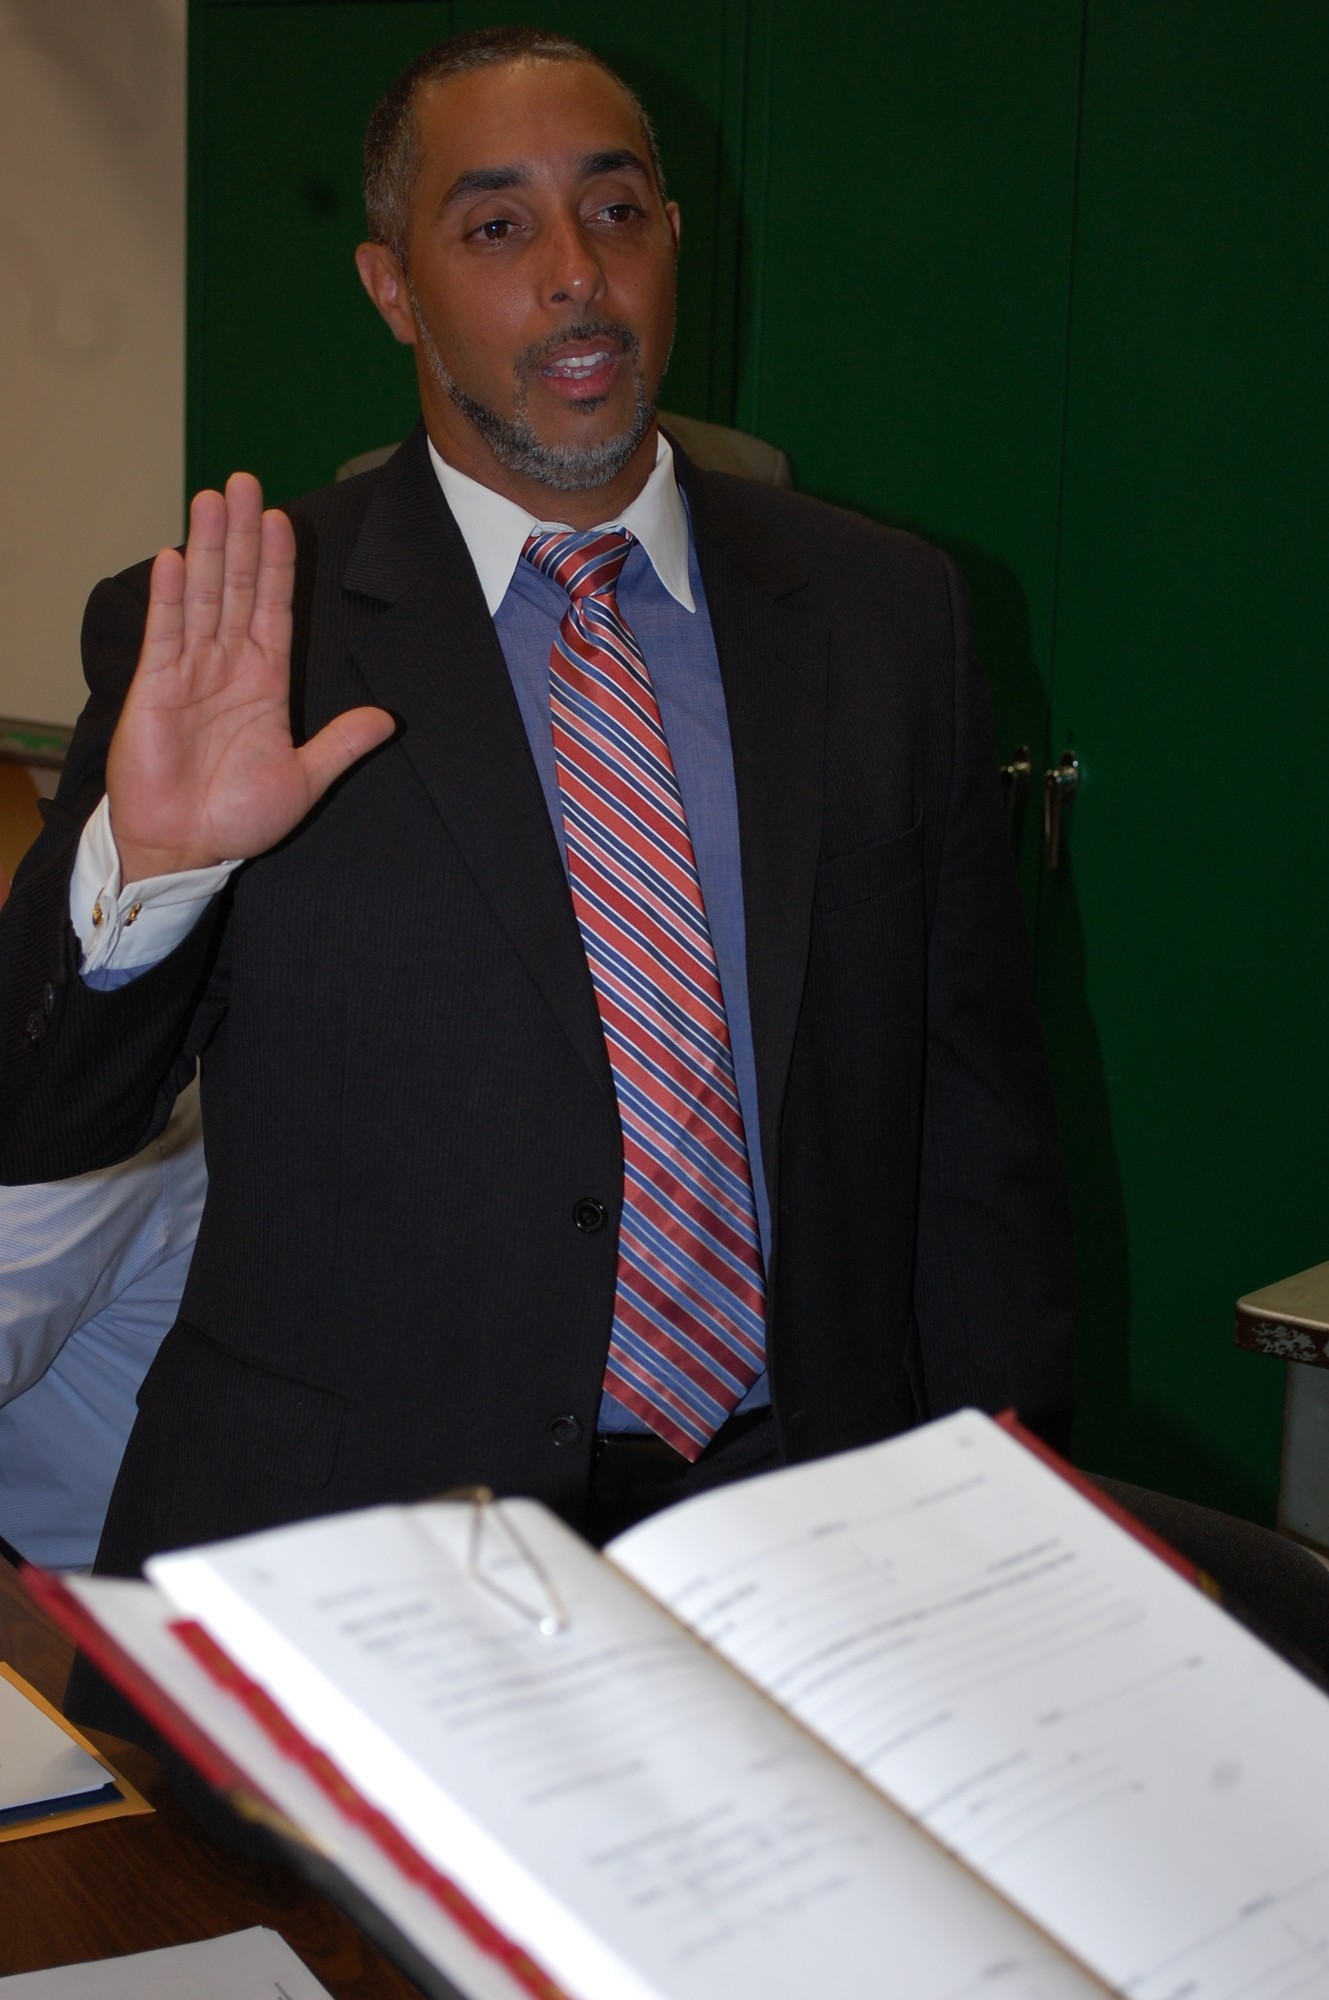 Armando Hernandez was sworn in to his first term on the District 24 Board of Education.